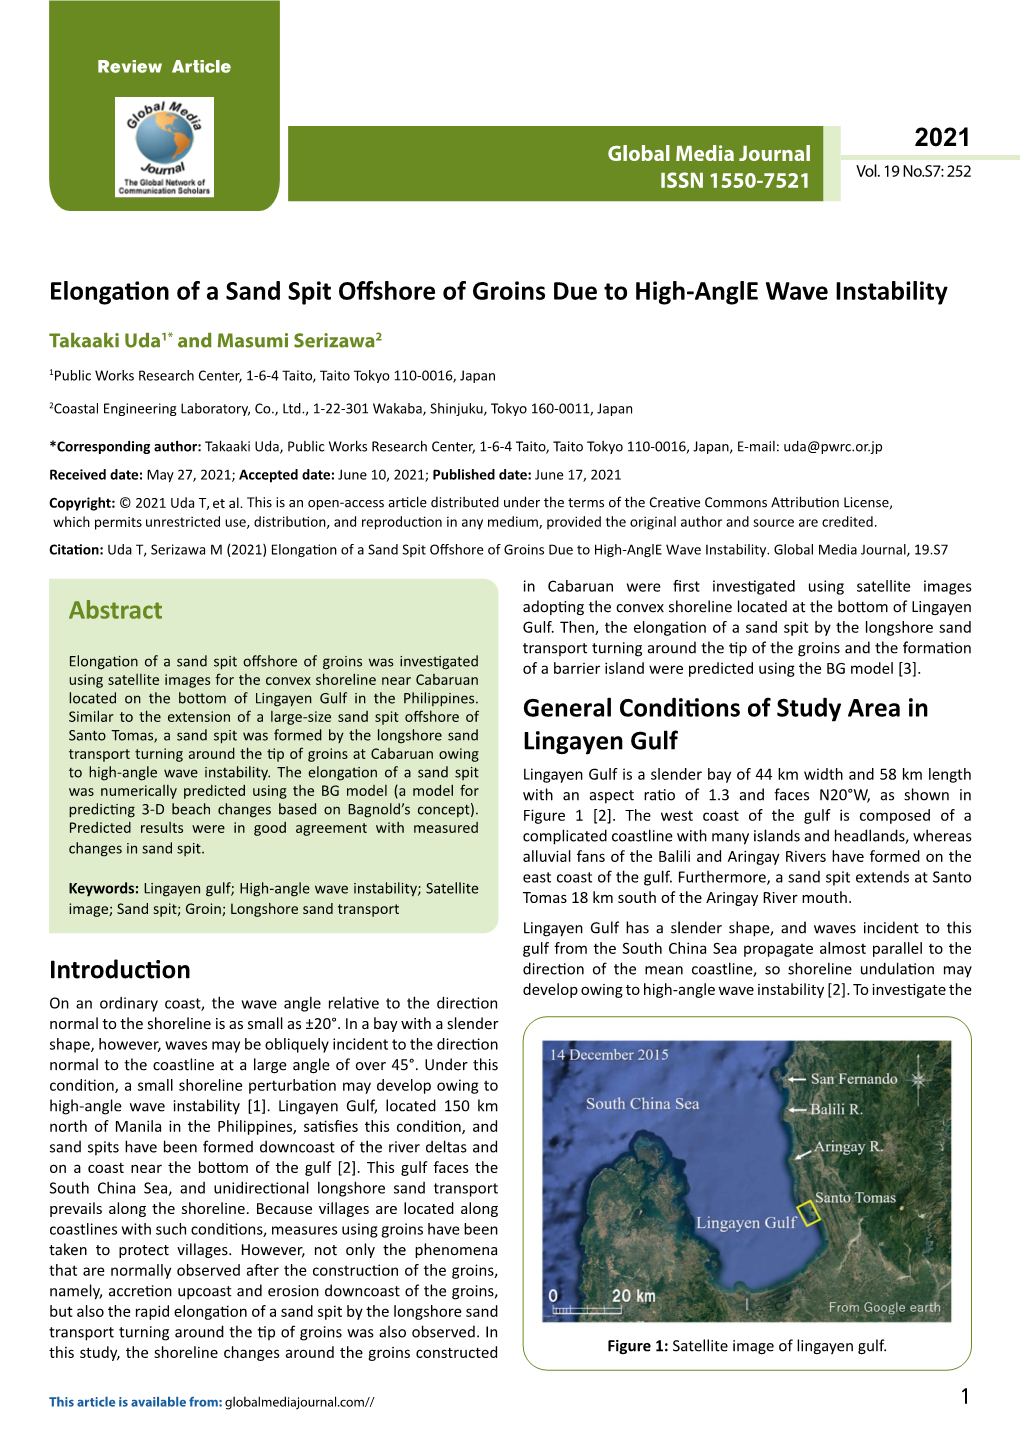 Elongation of a Sand Spit Offshore of Groins Due to High-Angle Wave Instability